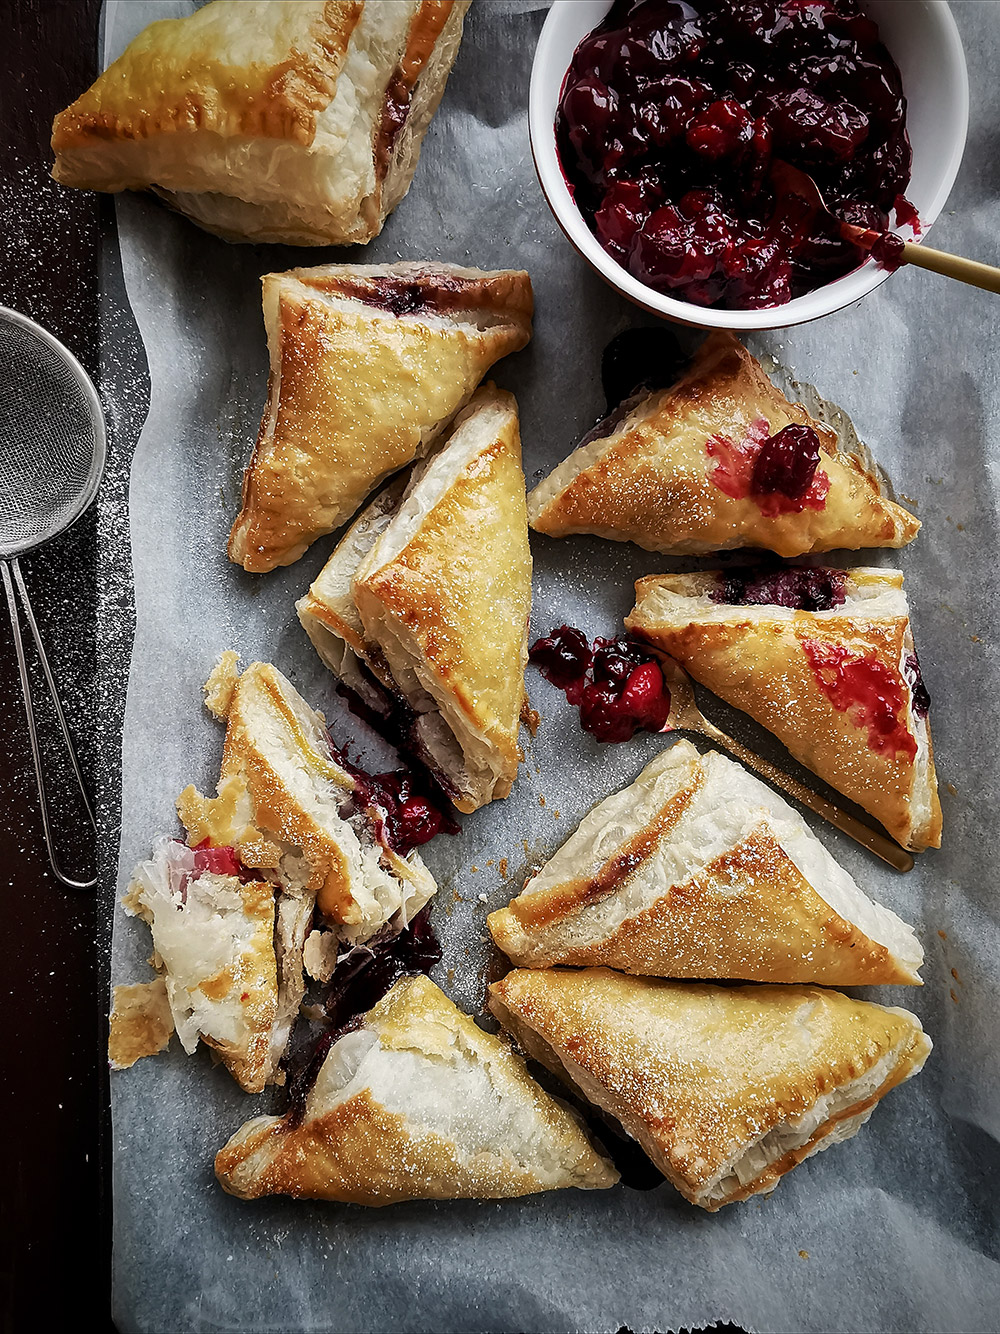 Sourcherry turnovers